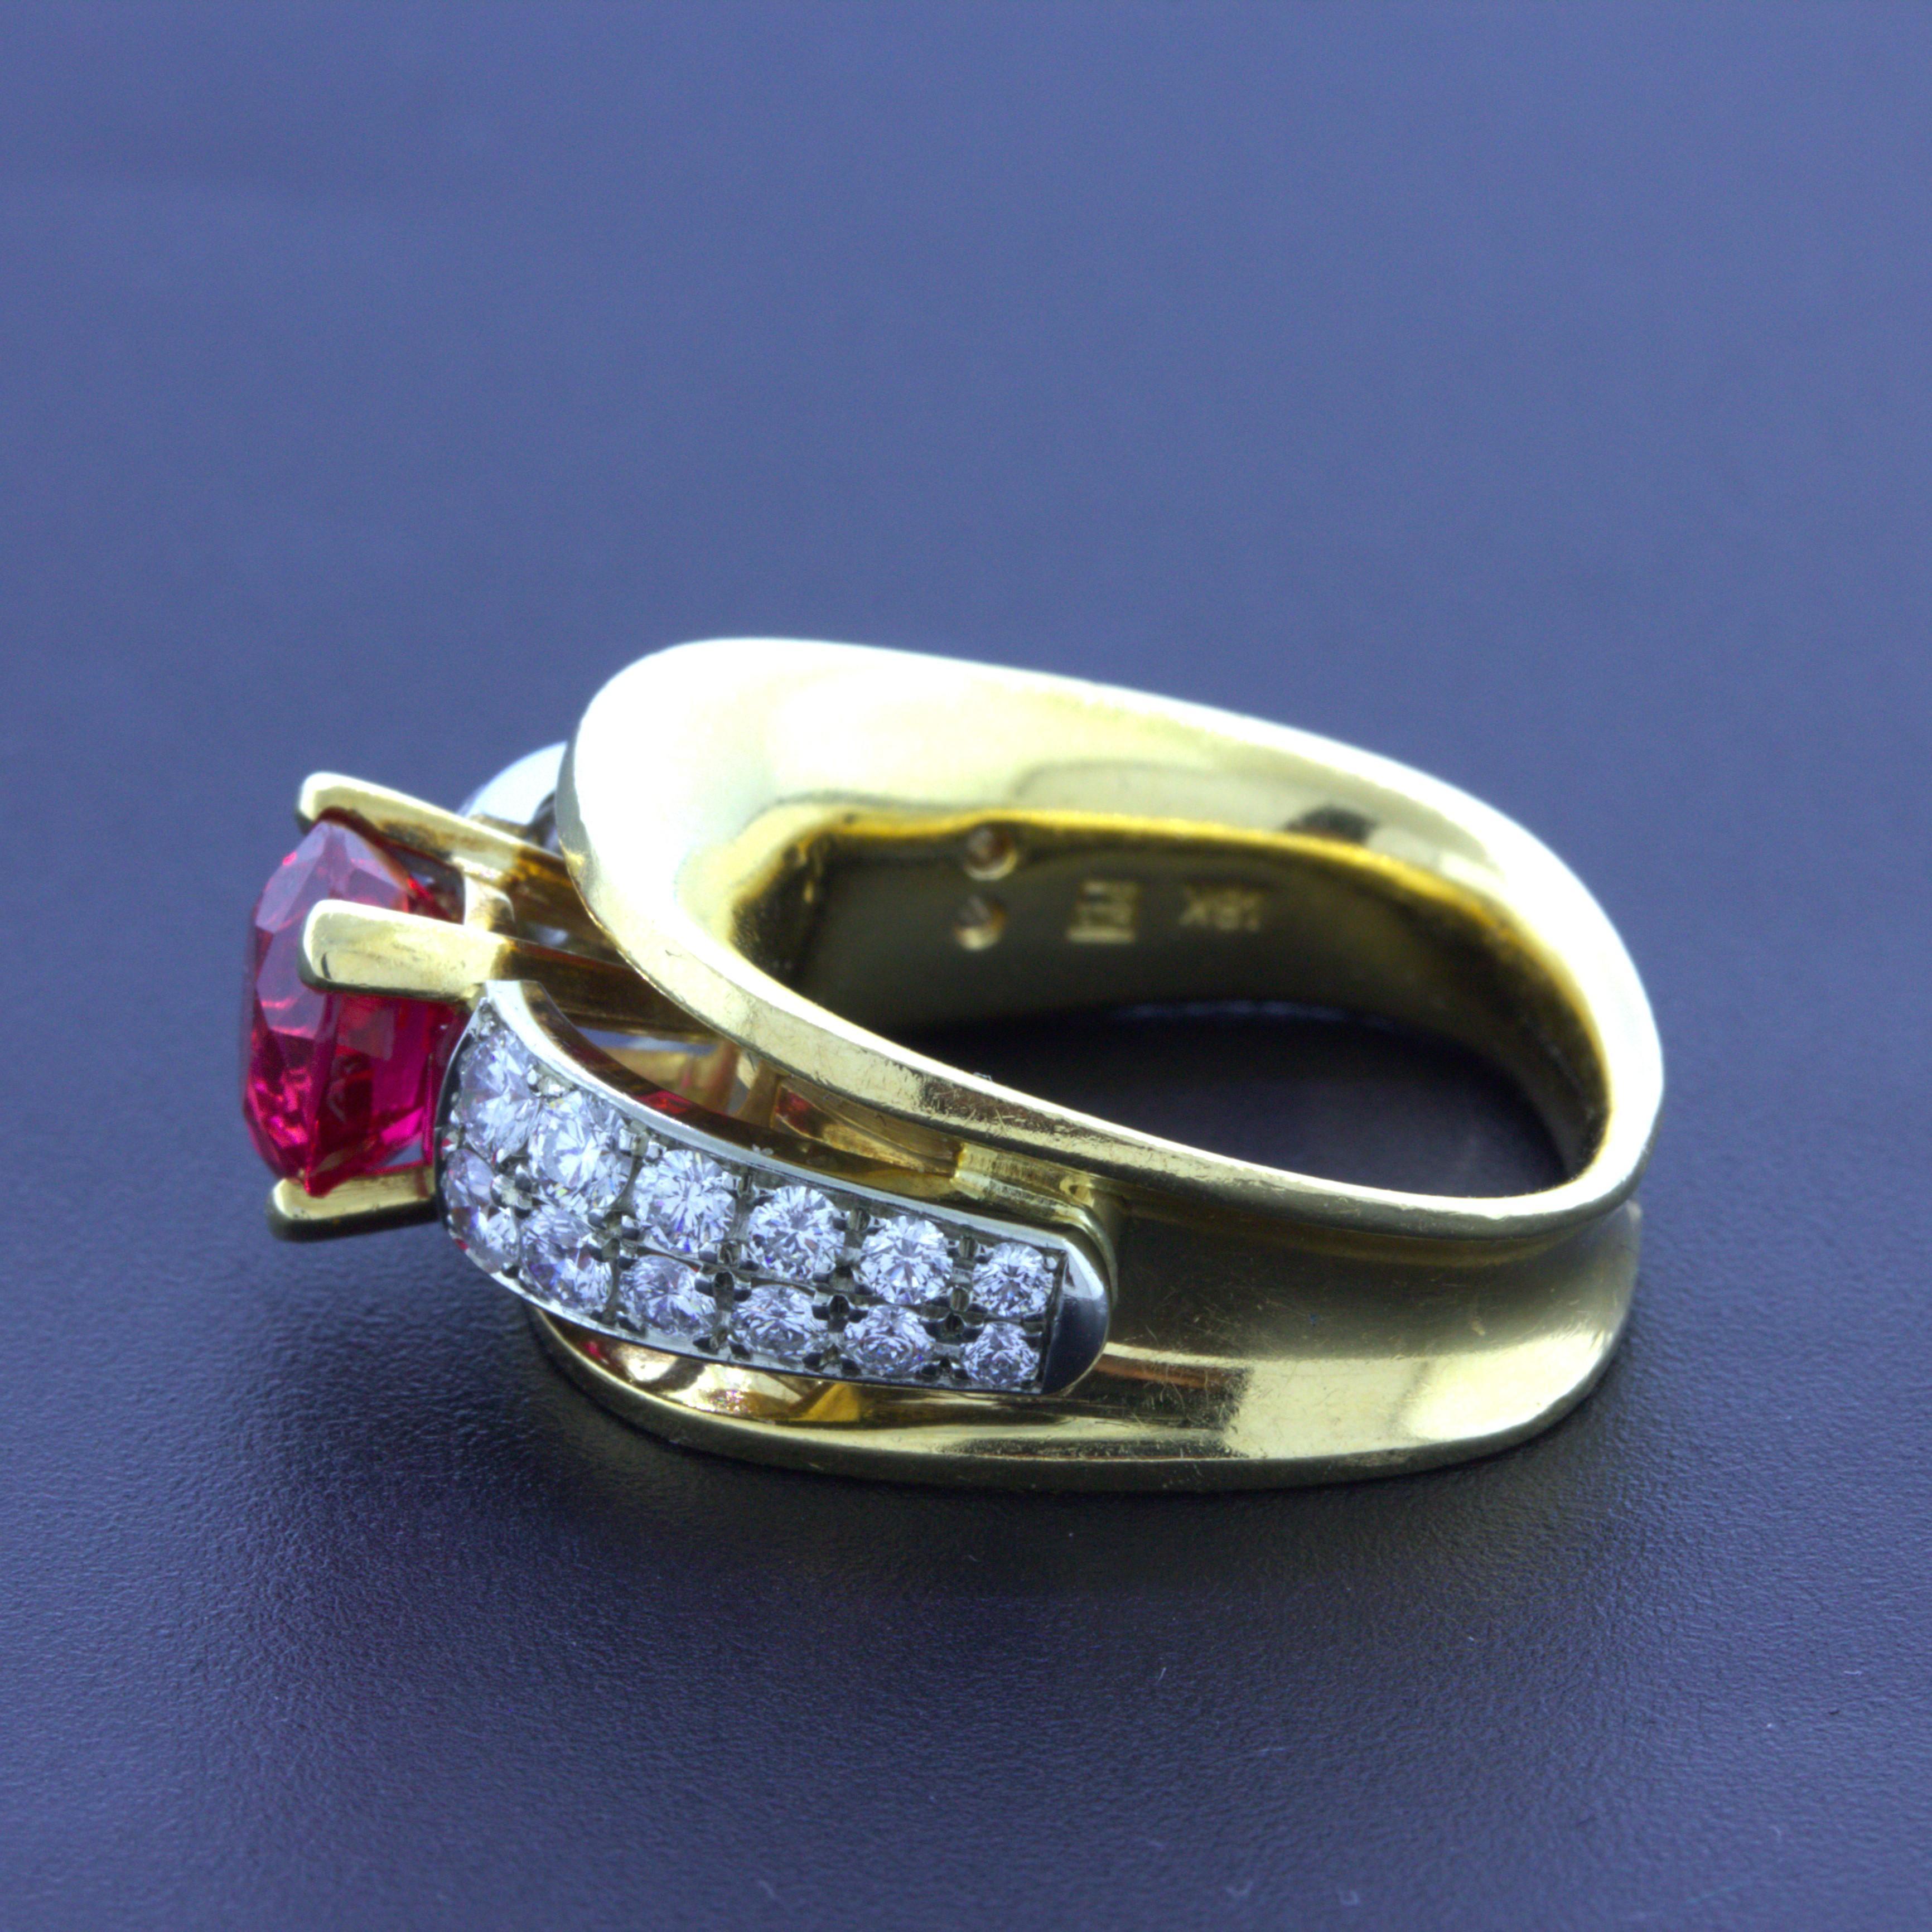 Exceptional 2.28 Carat Burmese Red Spinel Diamond 18K Yellow Gold Ring, GIA Cert In New Condition For Sale In Beverly Hills, CA